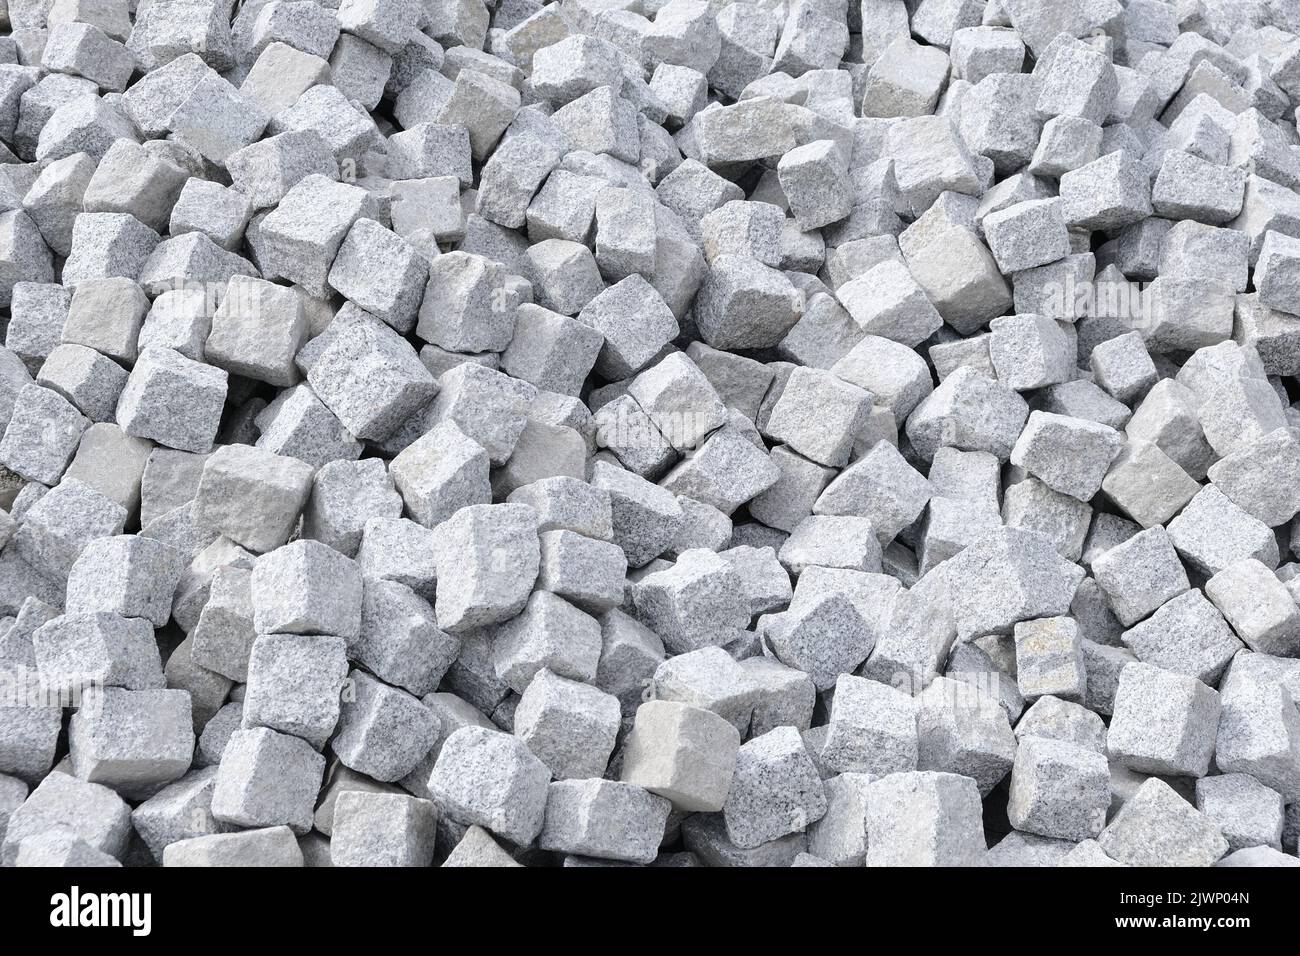 Granite paving stones in typical cube shape Stock Photo